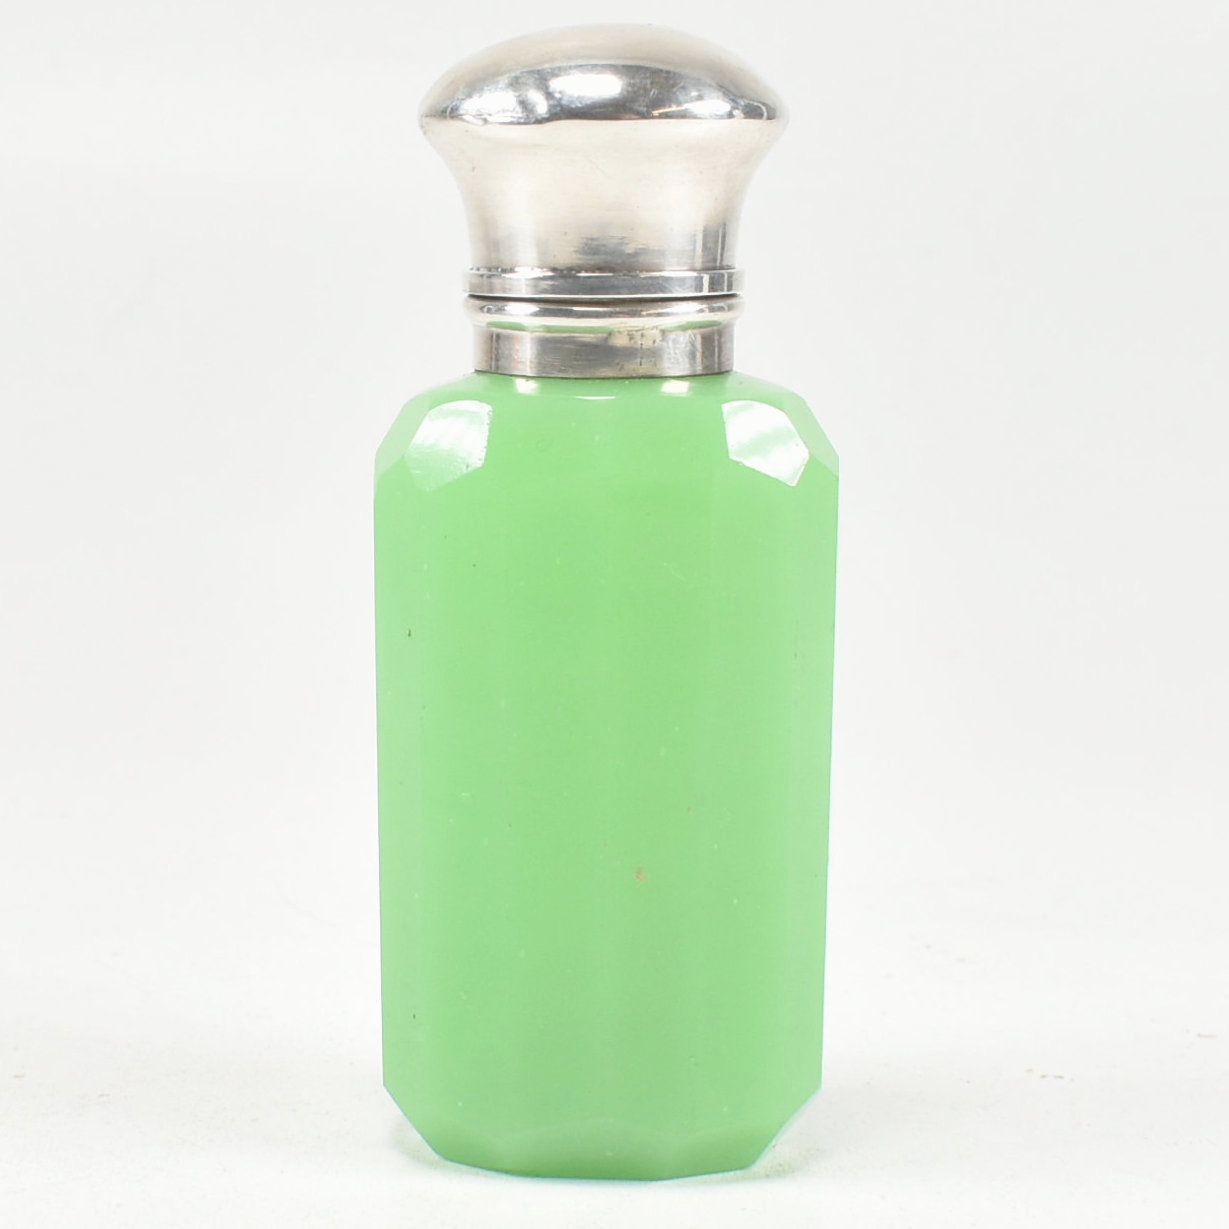 EARLY 20TH CENTURY WHITE METAL & URANIUM GLASS SCENT BOTTLE